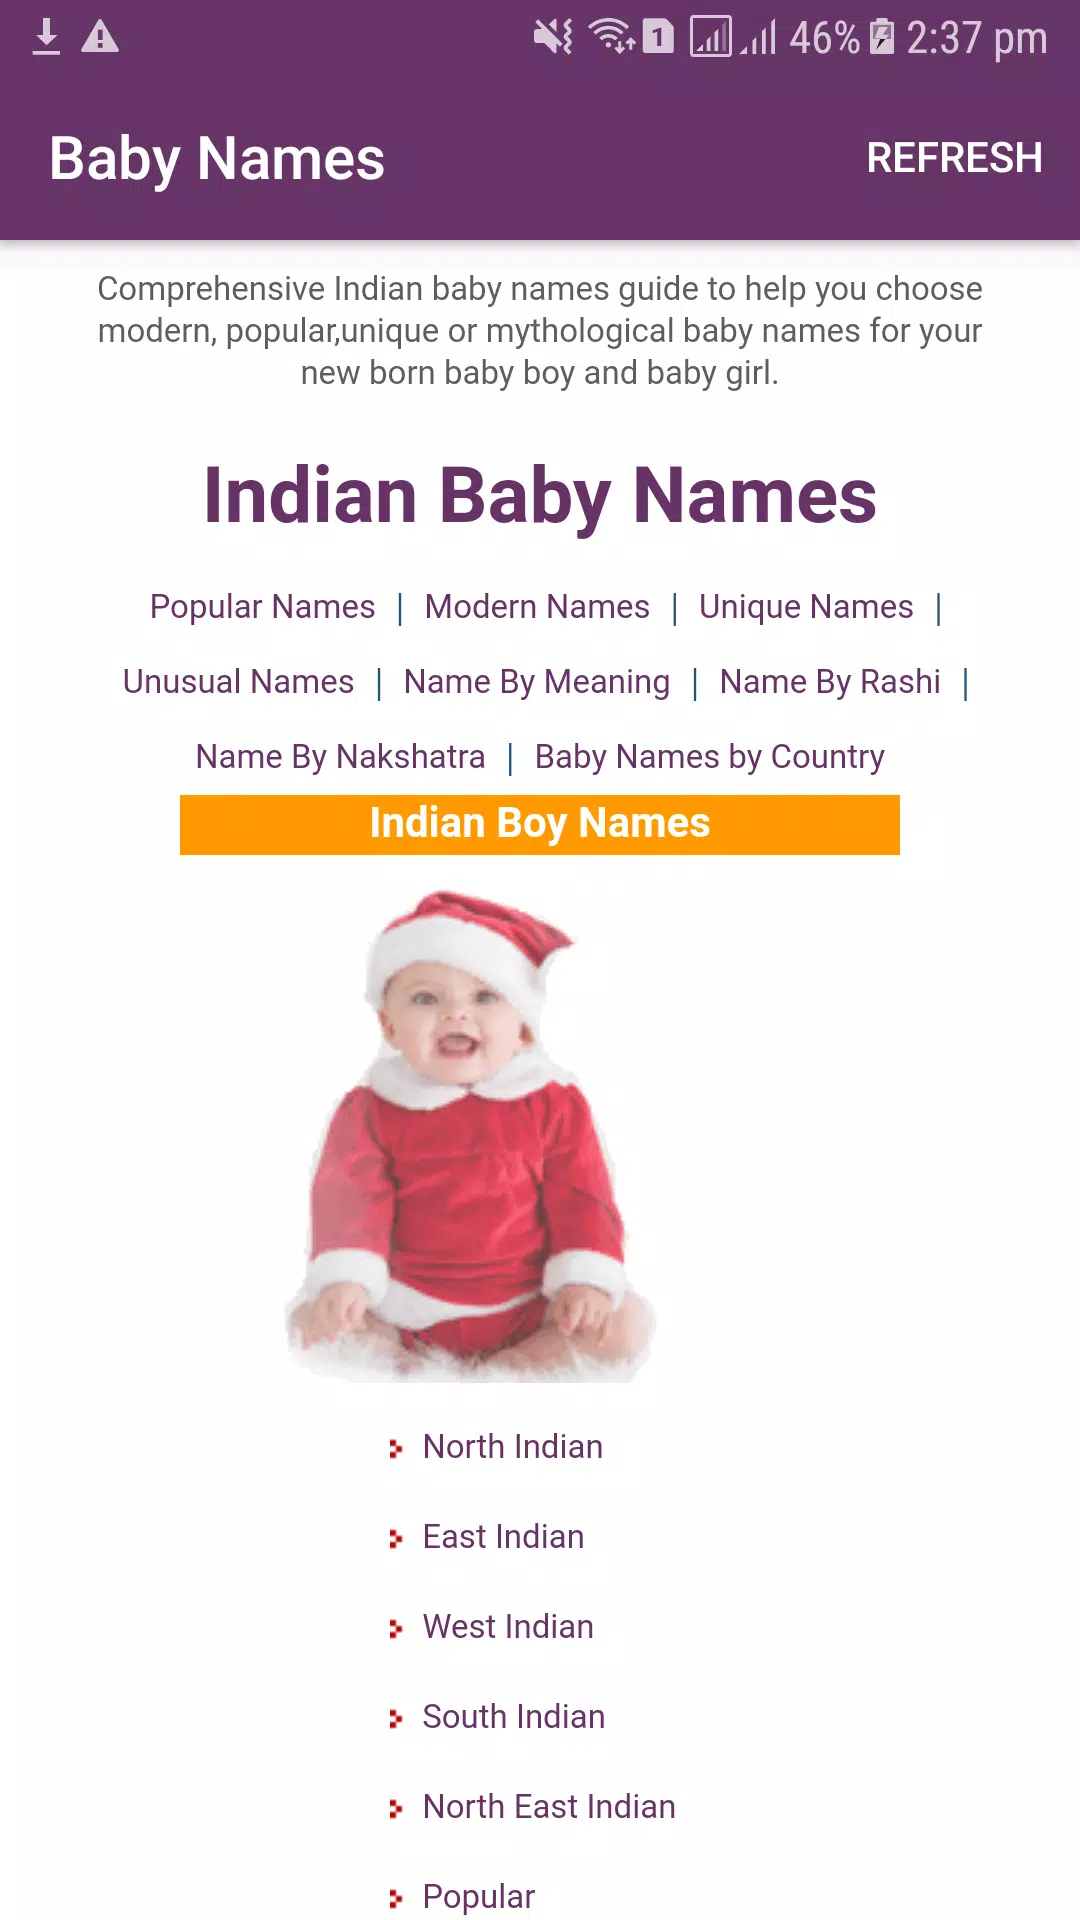 Baby Names with Category 2019 (Daily Updated) for Android - APK Download